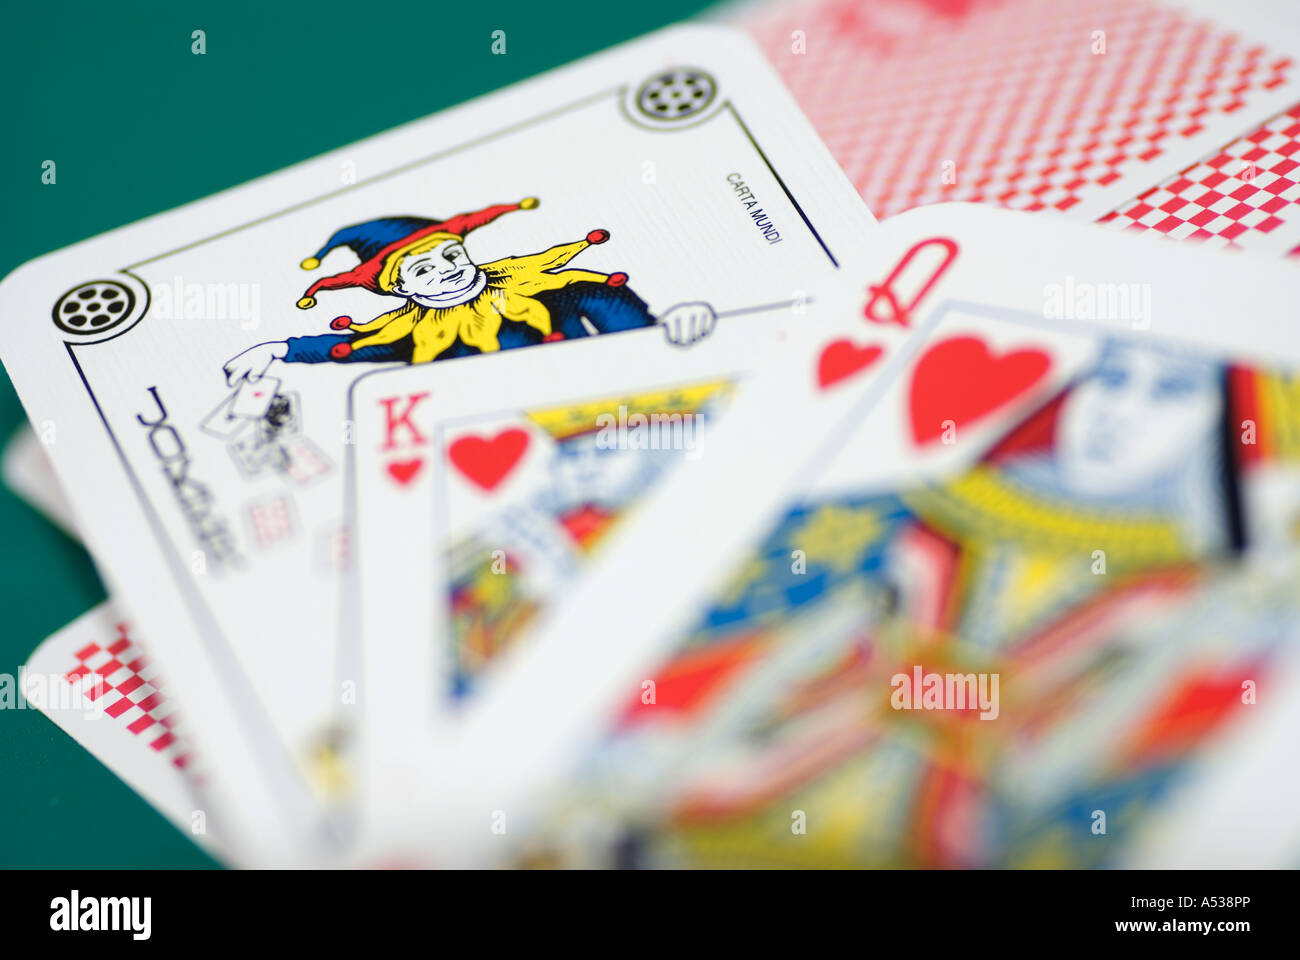 Joker And King And Queen Of Hearts Playing Card Stock Photo Alamy